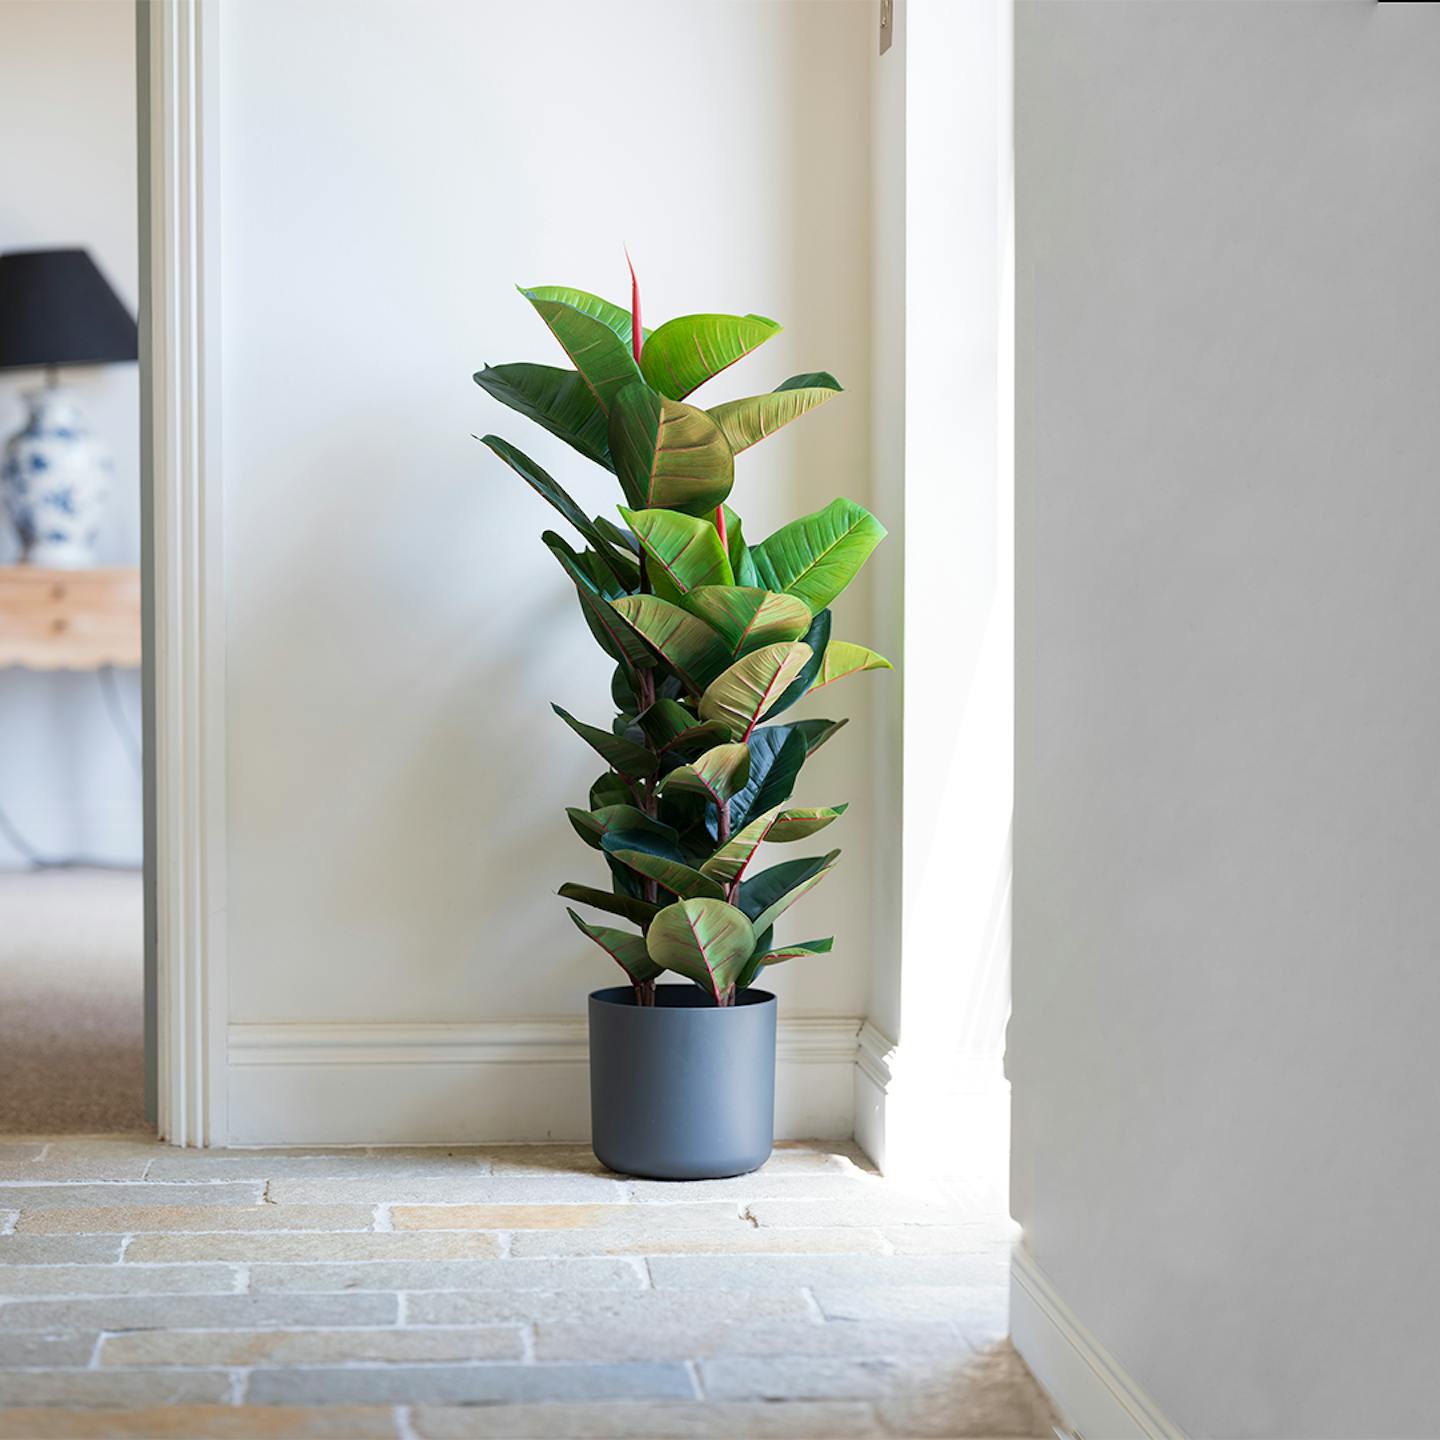 Artificial rubber tree against white walls